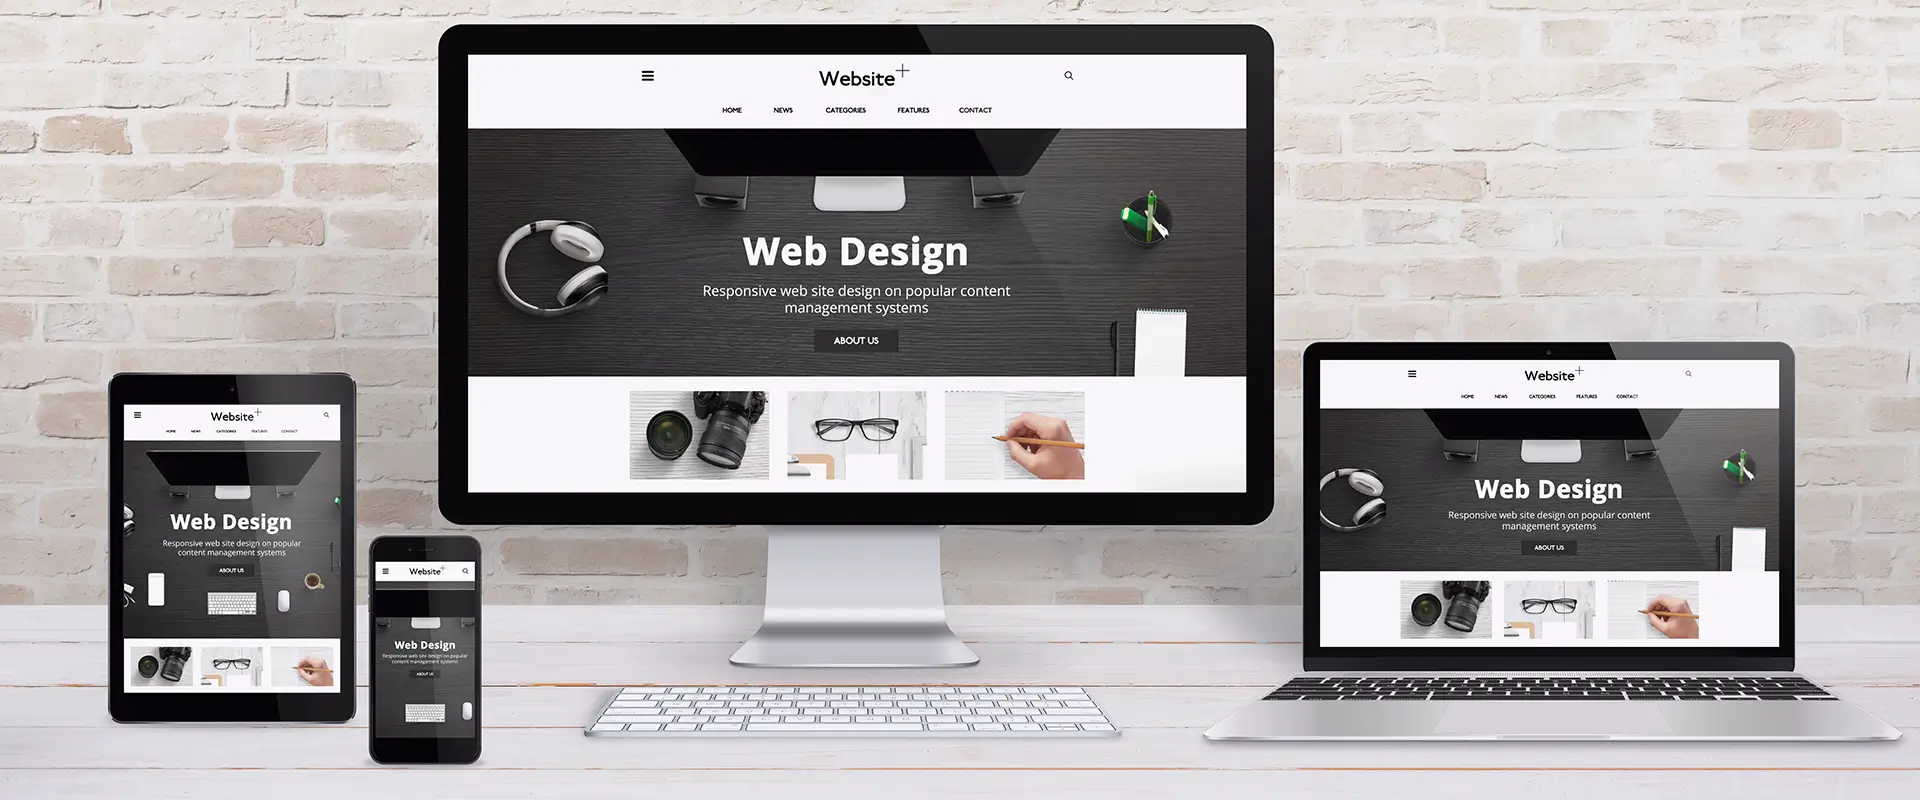 We can design websites to suit all types of devices